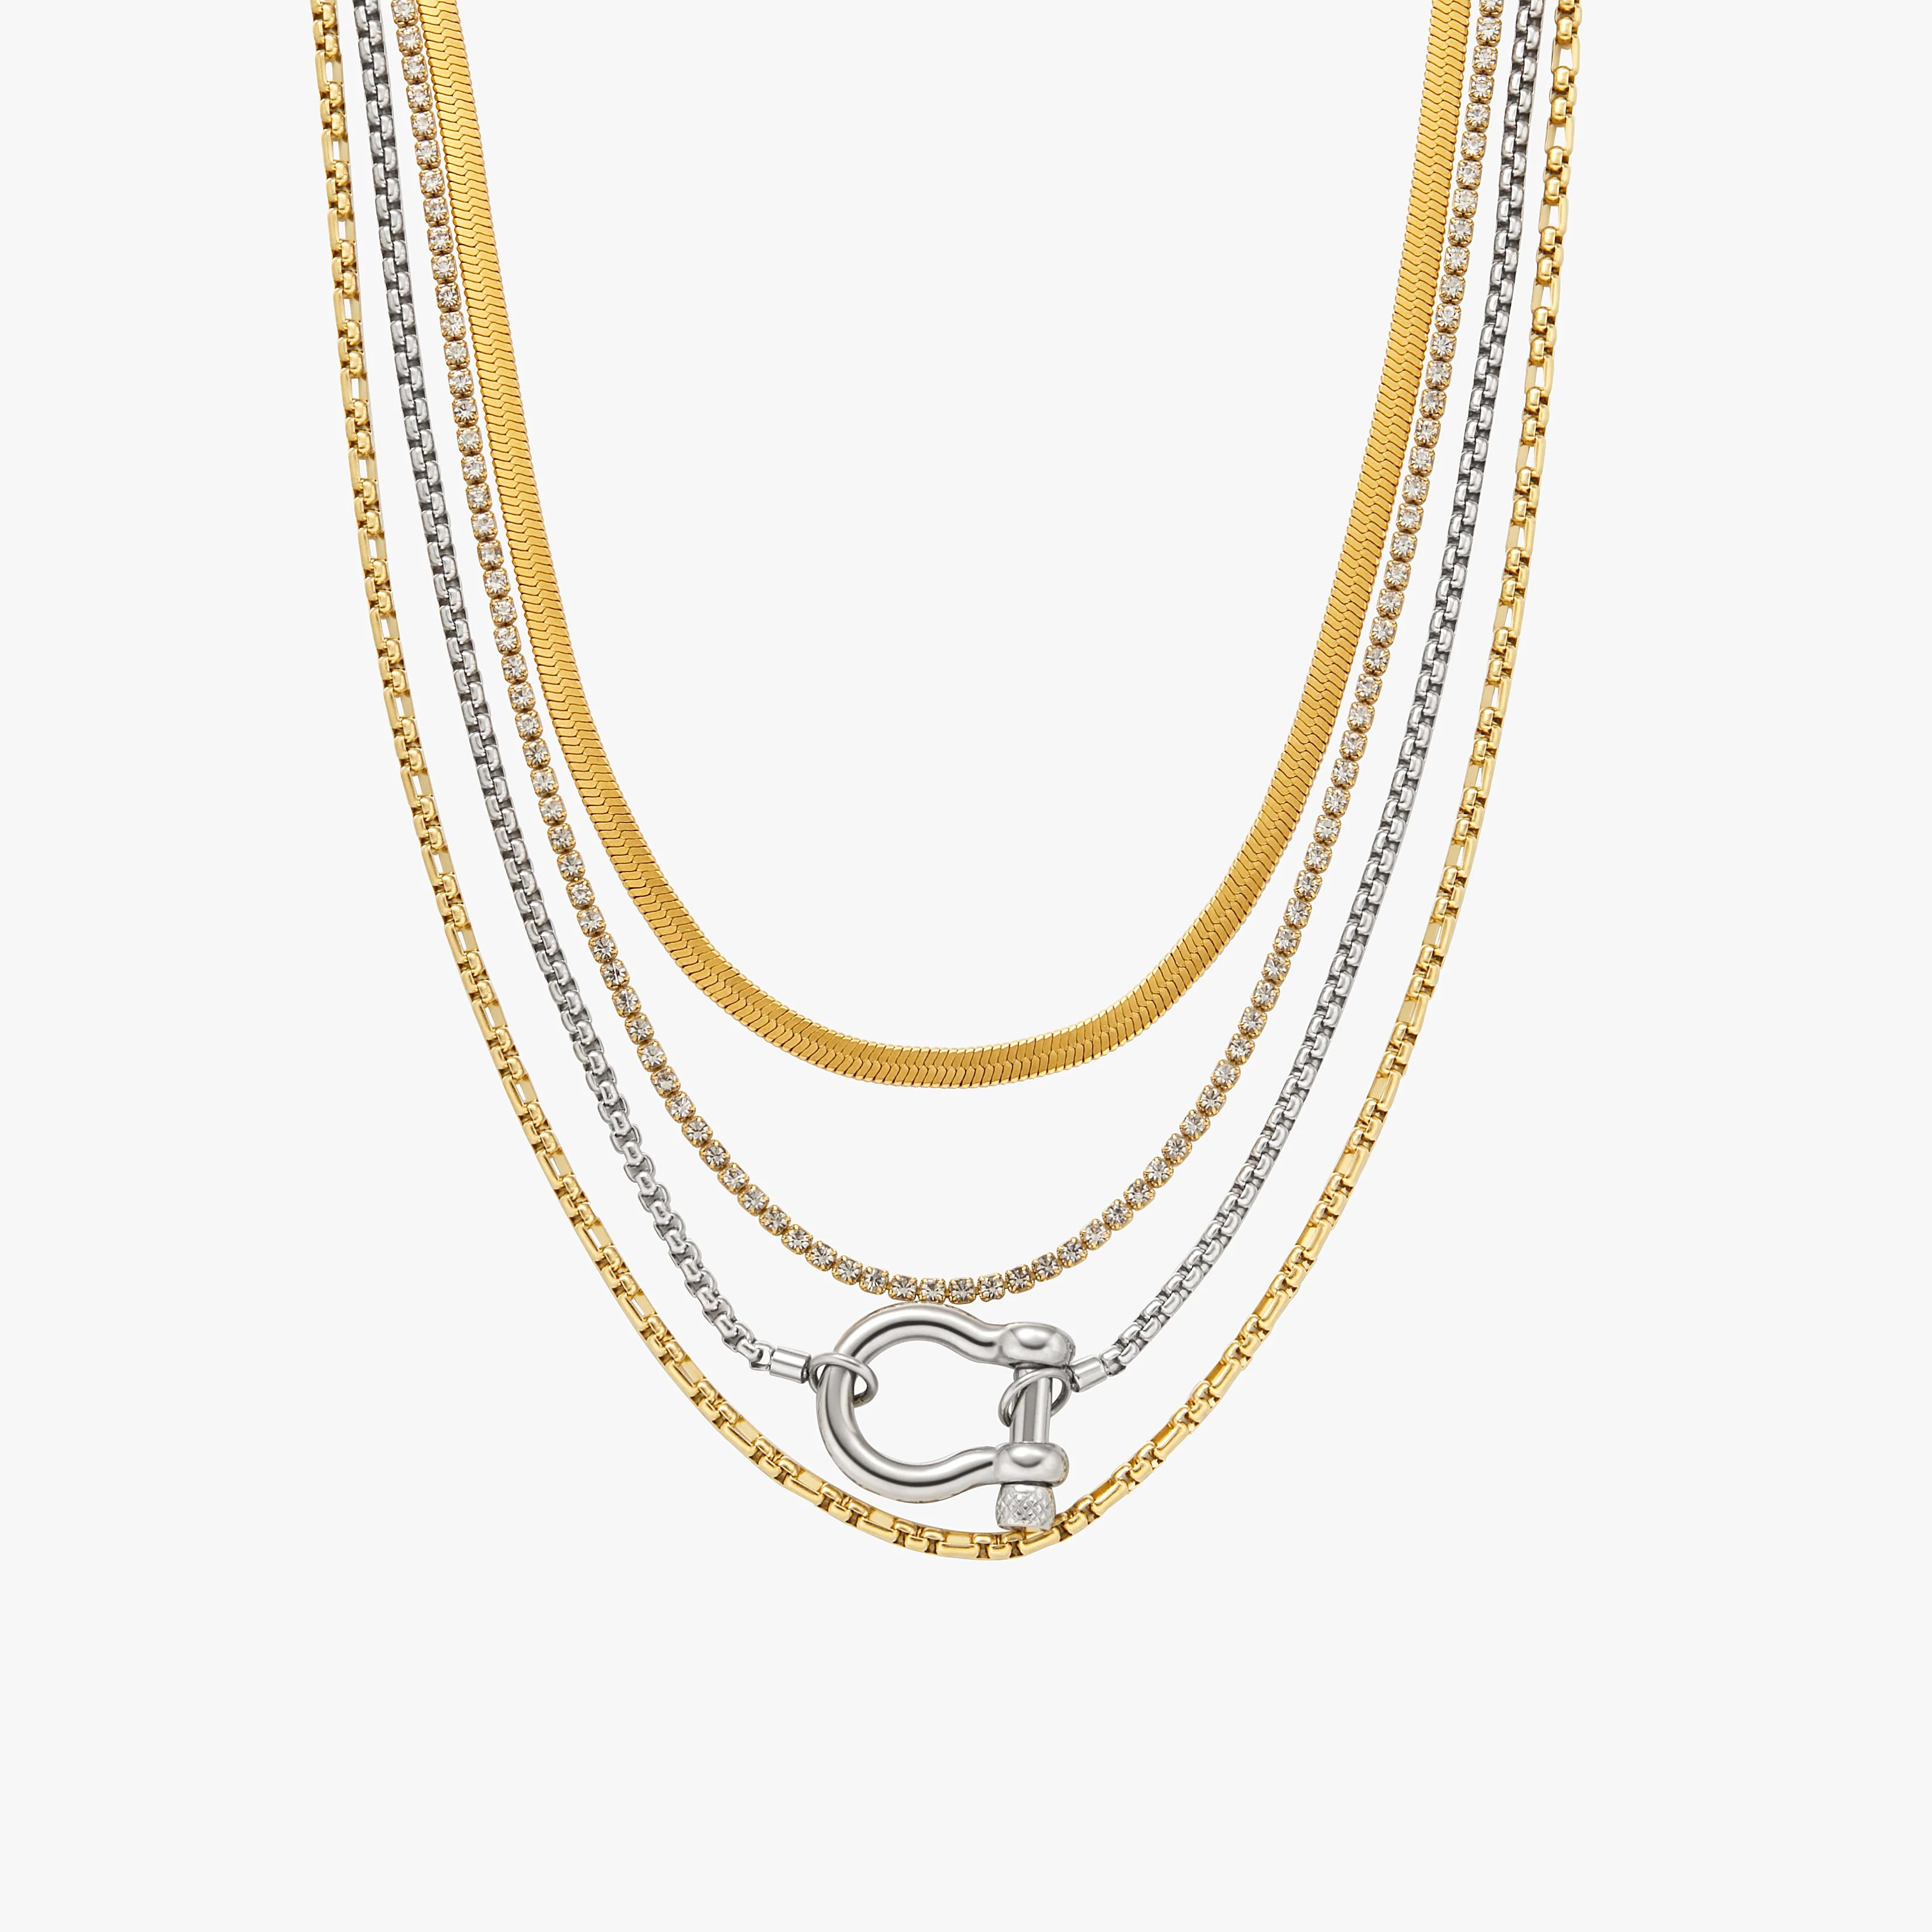 Rachel Layered Mixed Metal Necklace | Victoria Emerson